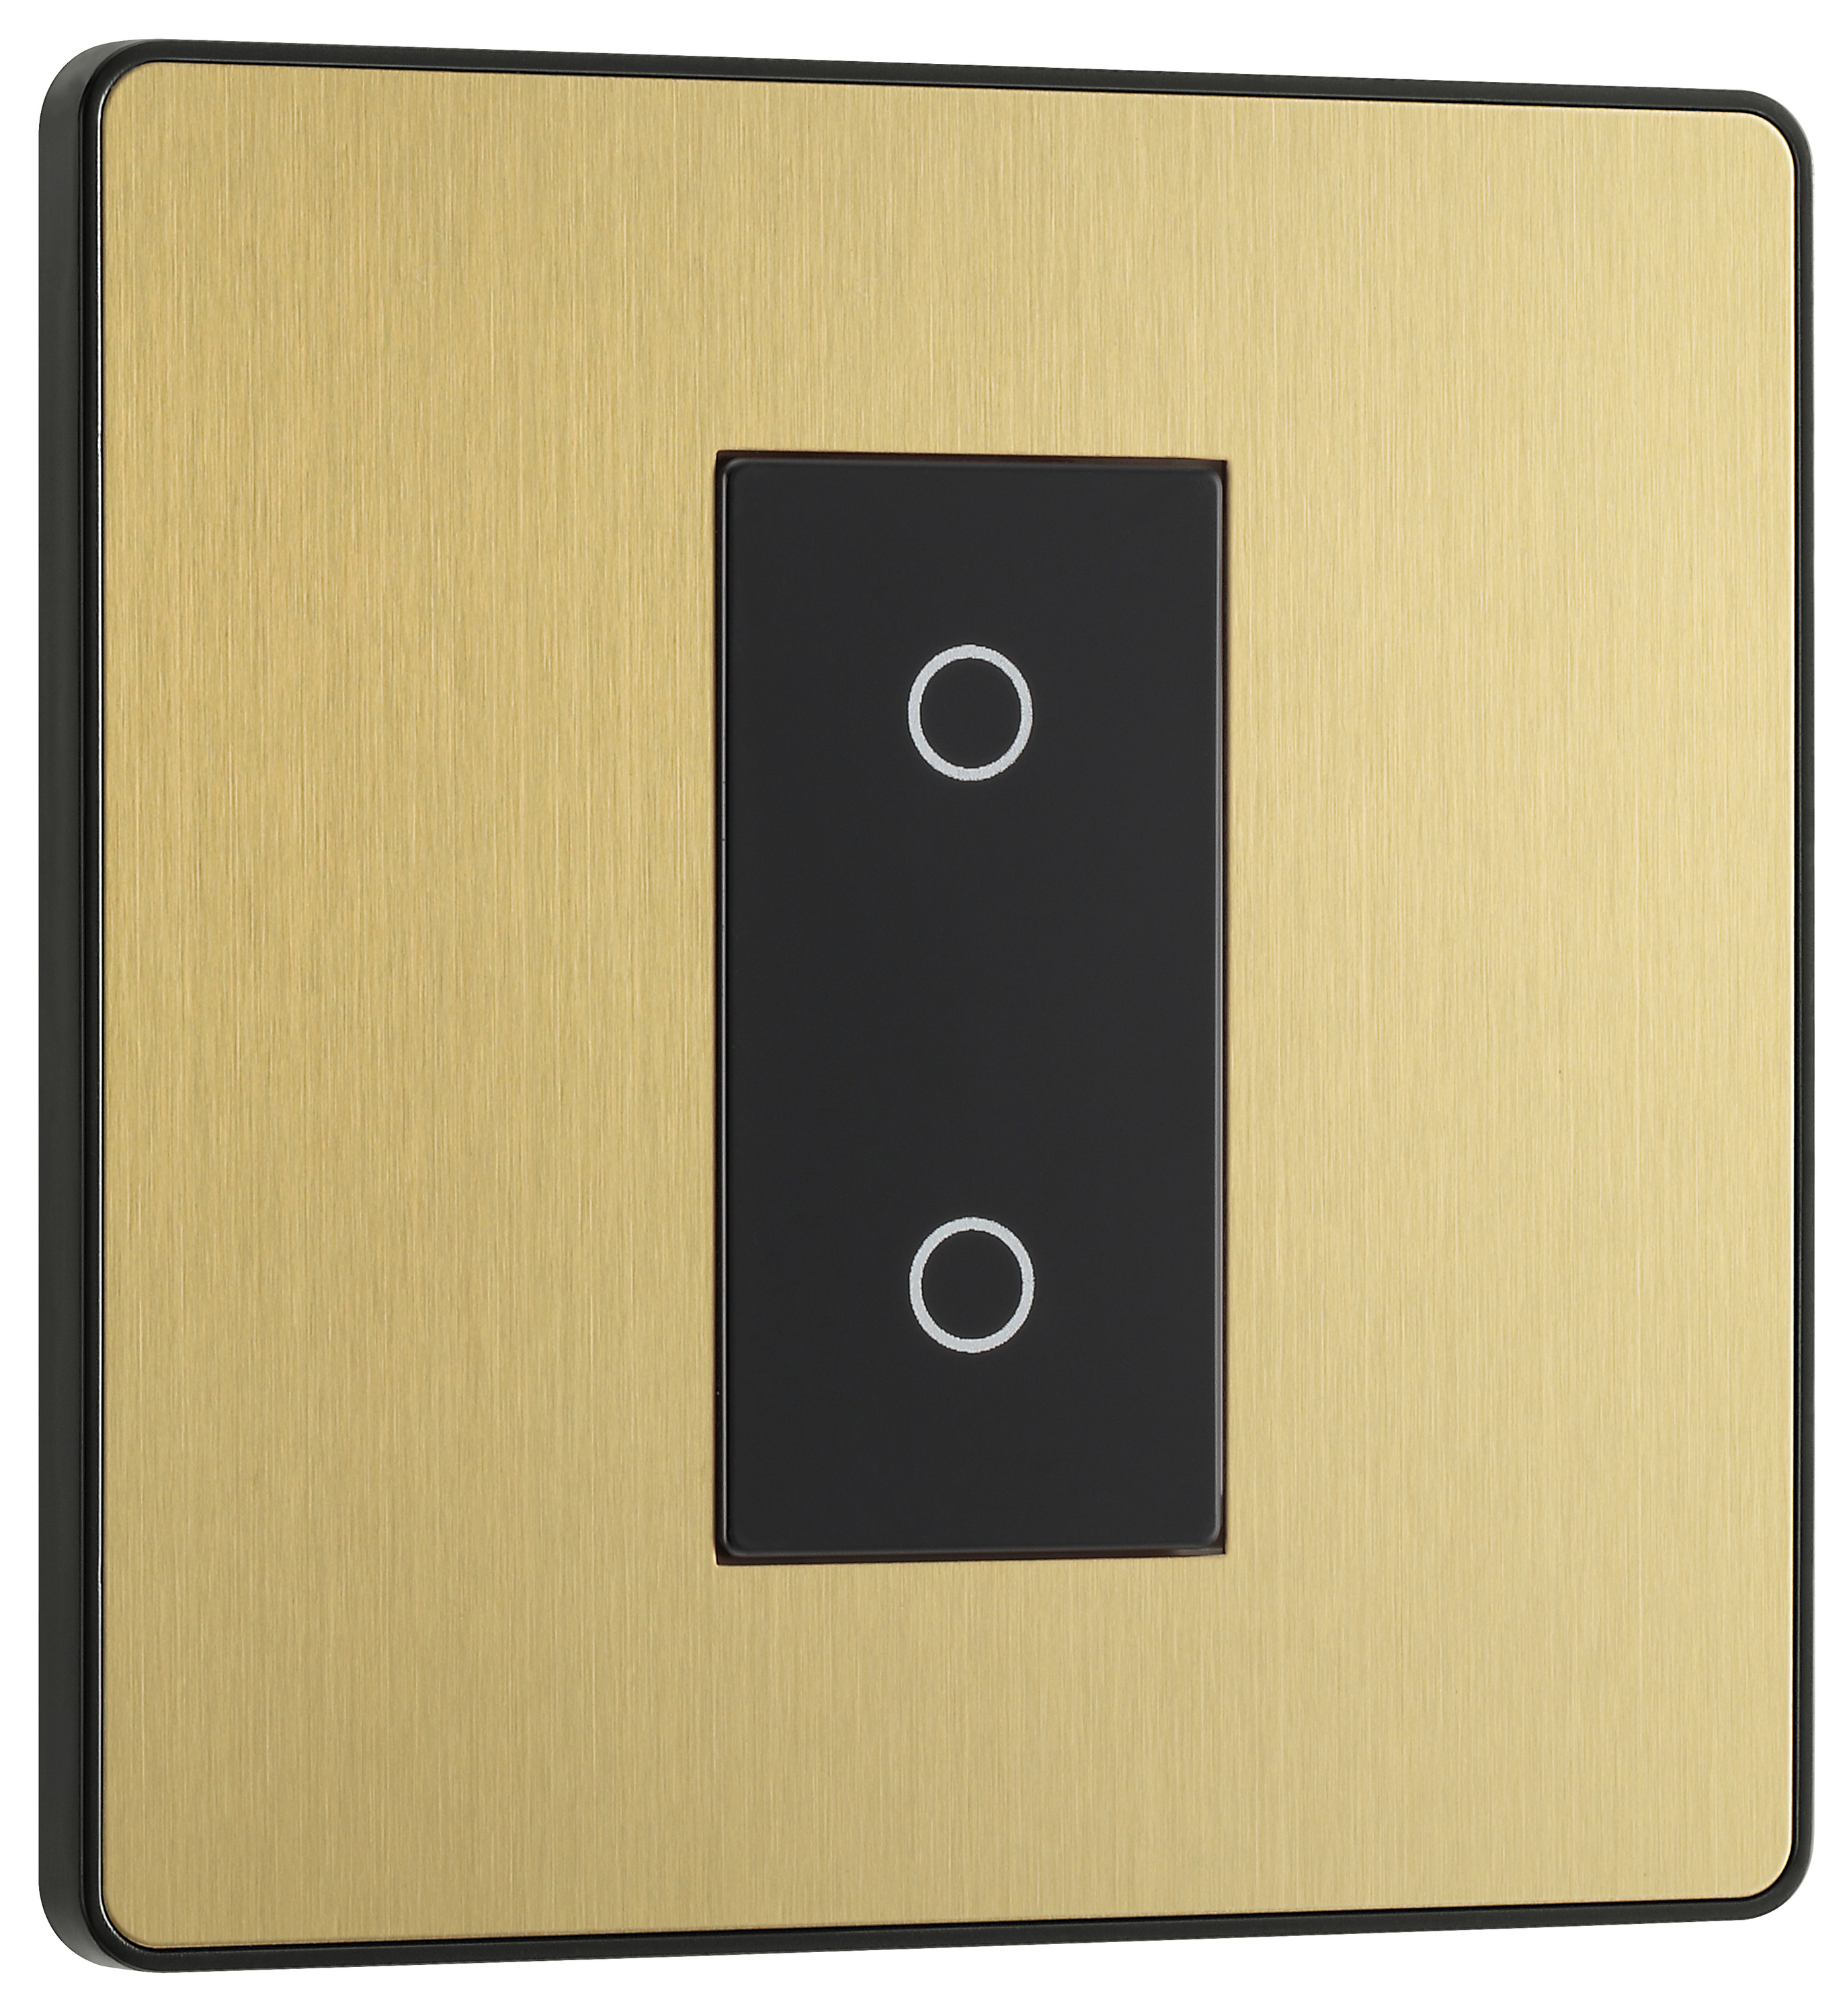 Image of BG Evolve Secondary Brushed Brass 2 Way Single Touch Dimmer Switch - 200W